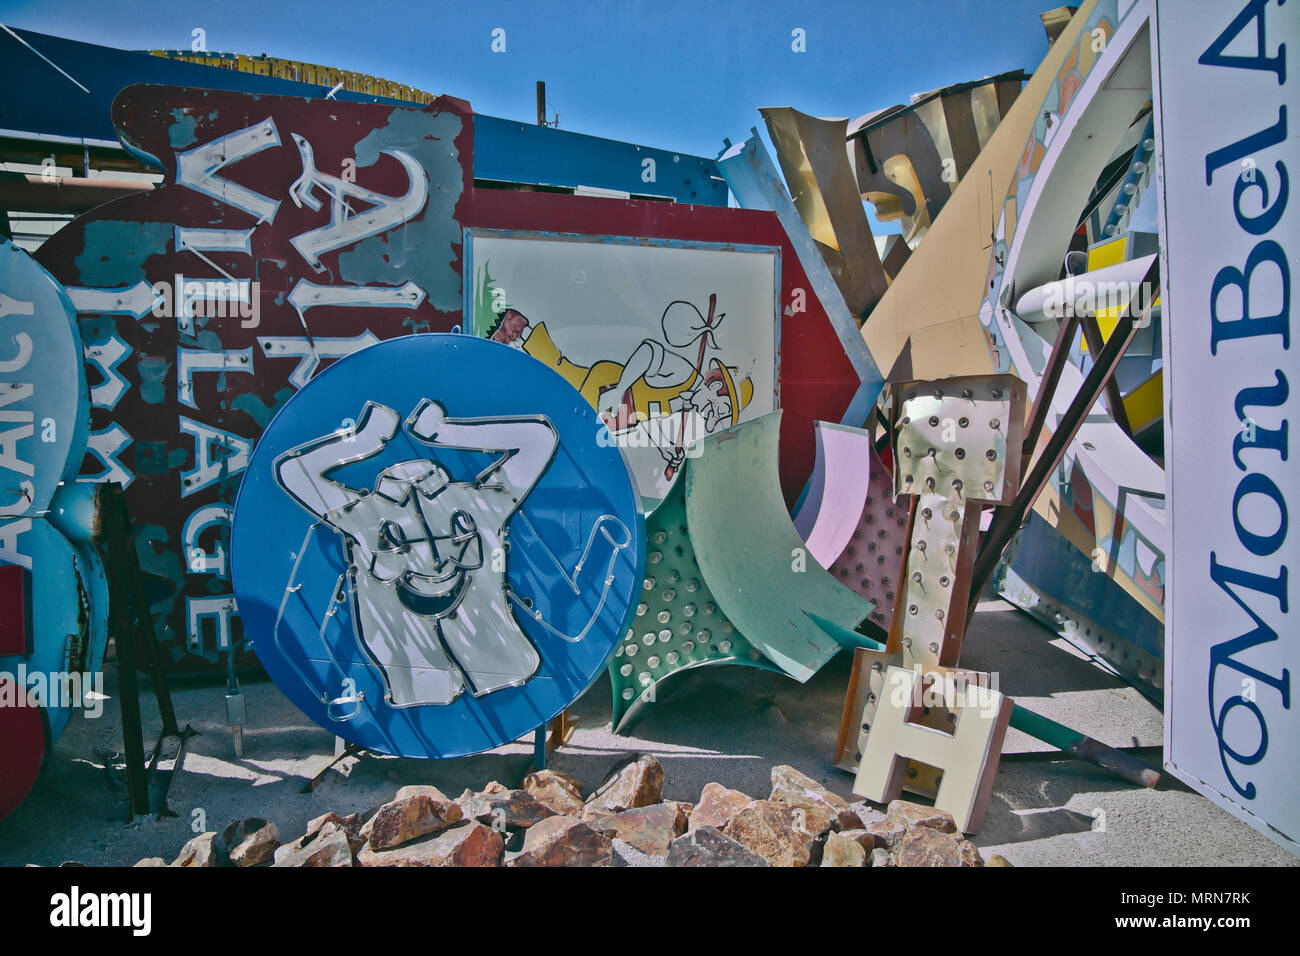 Old Neon Signs with retro construction designs are displayed at Neon Boneyard Museum, Las Vegas, Nevada. It is a popular tourist attraction. Stock Photo